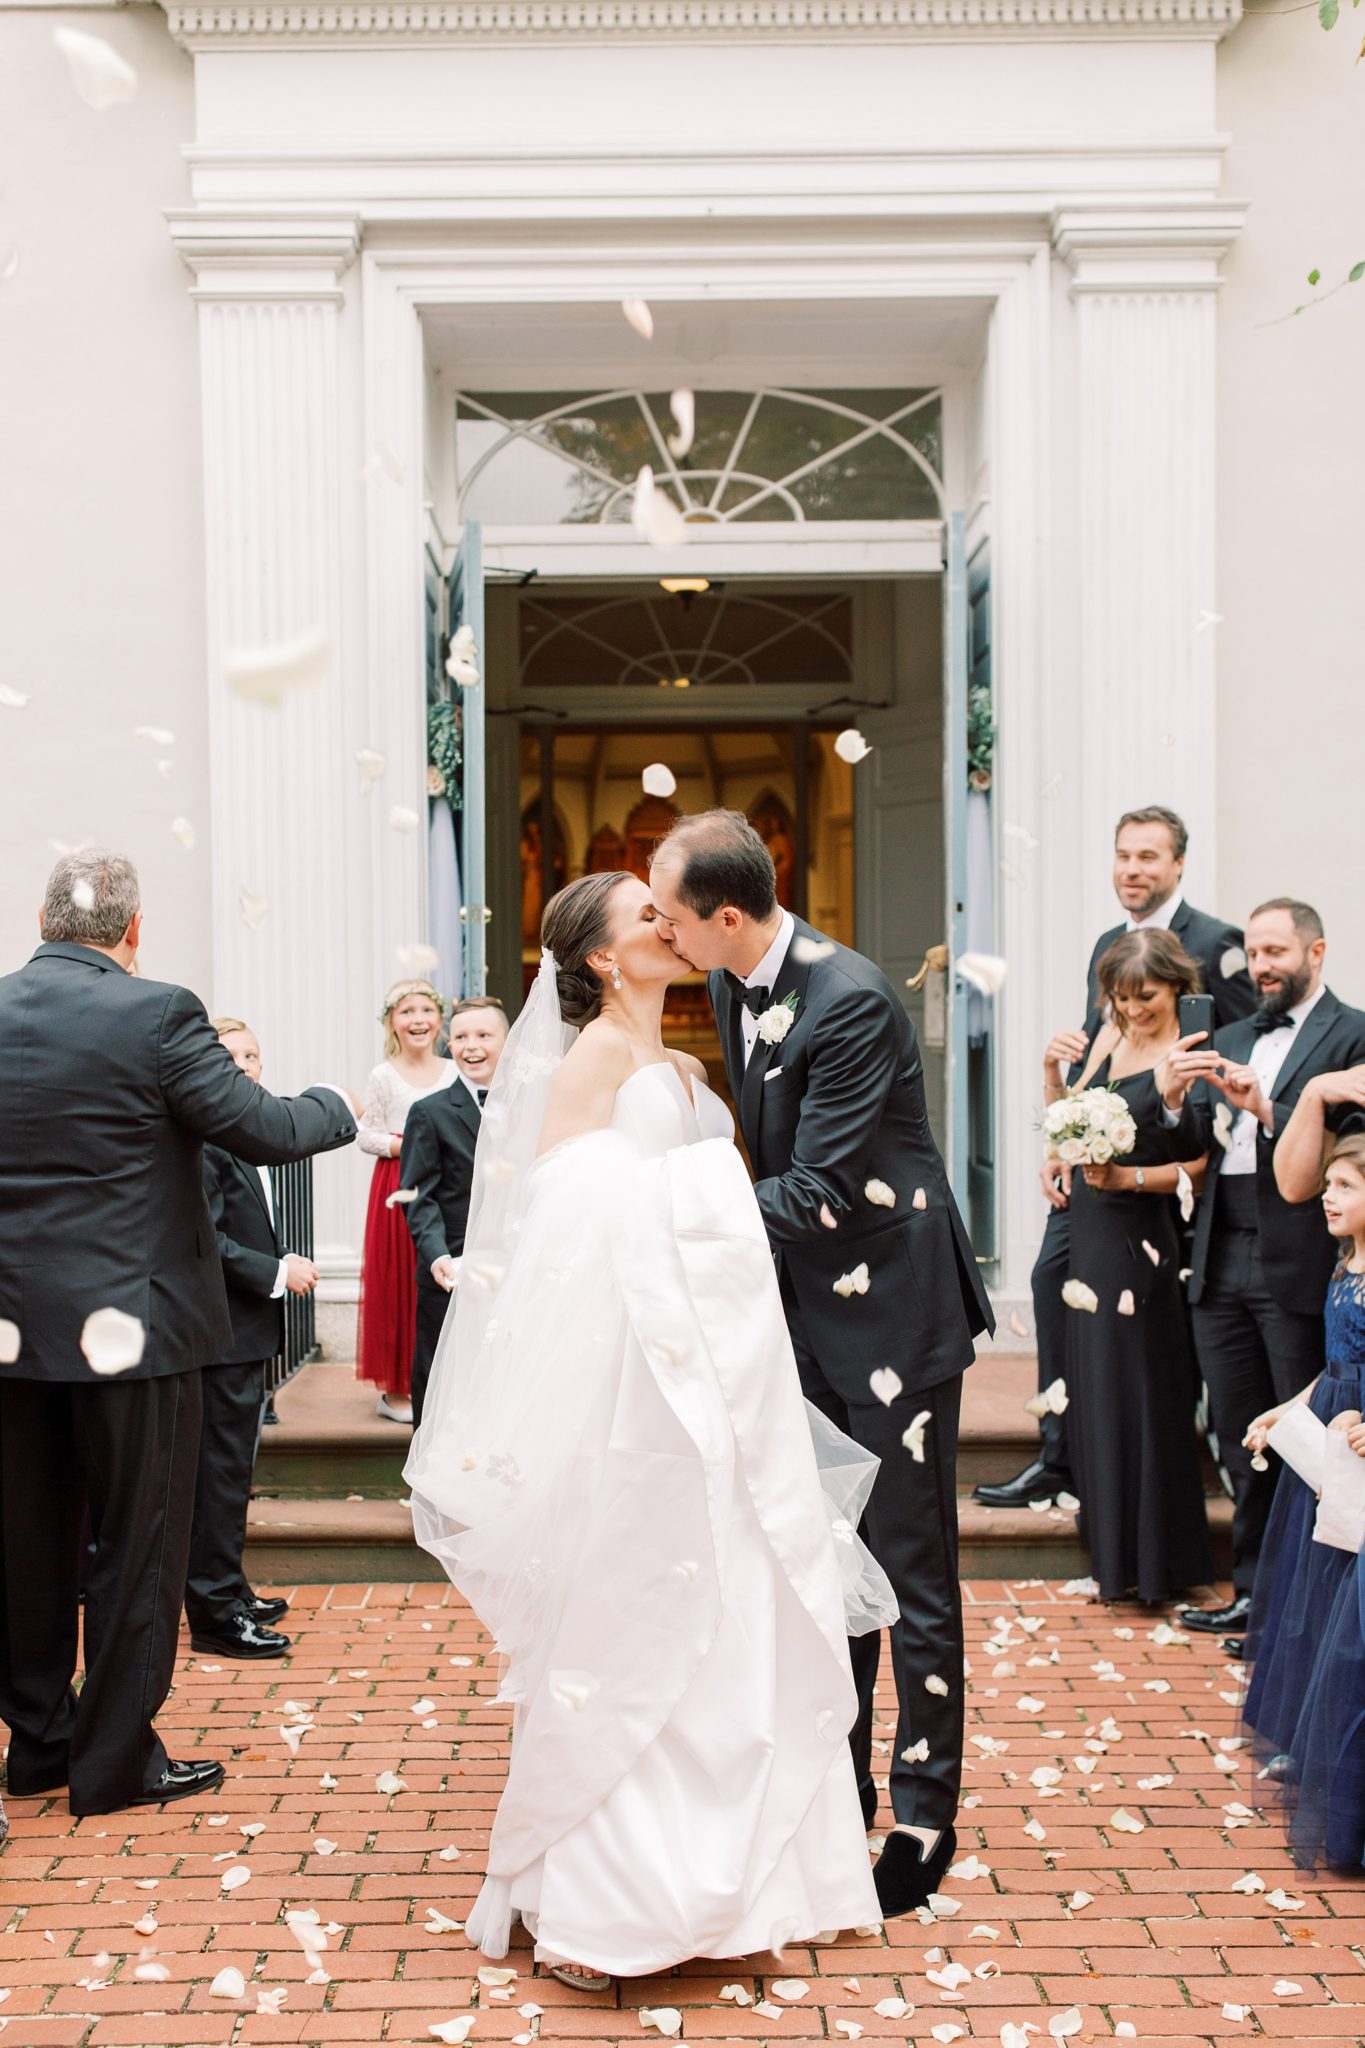 This Washington, DC wedding photographer discusses different exits options from your wedding ceremony or reception for a unique end to a perfect day!